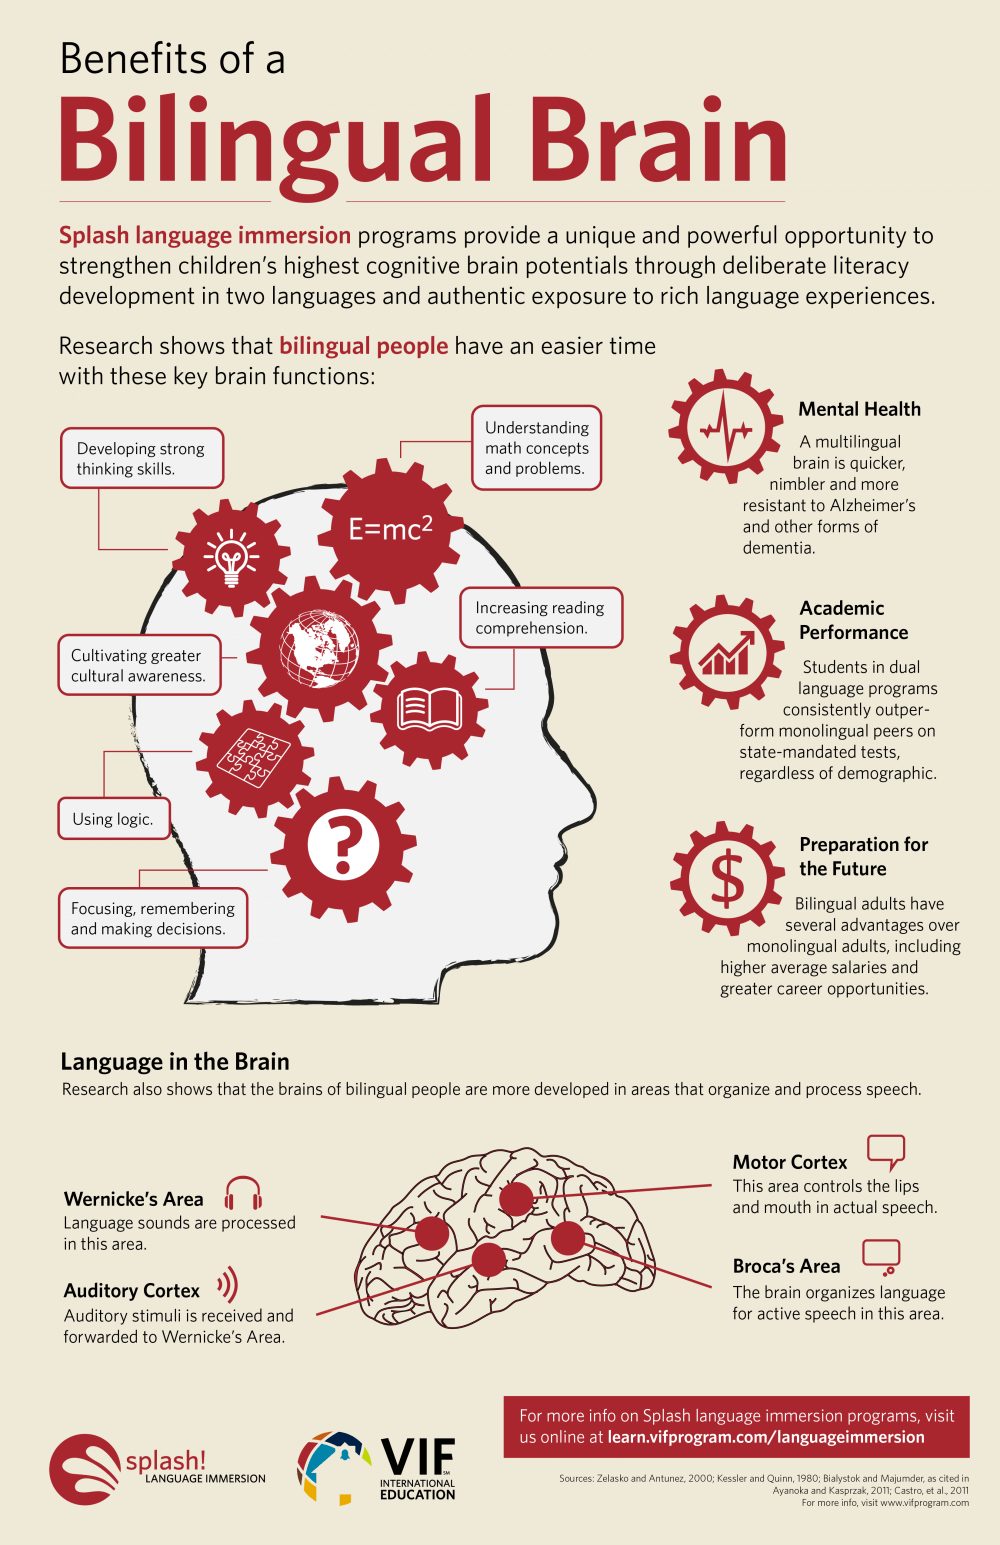 Benefits of a Bilingual Brain (Infographic)